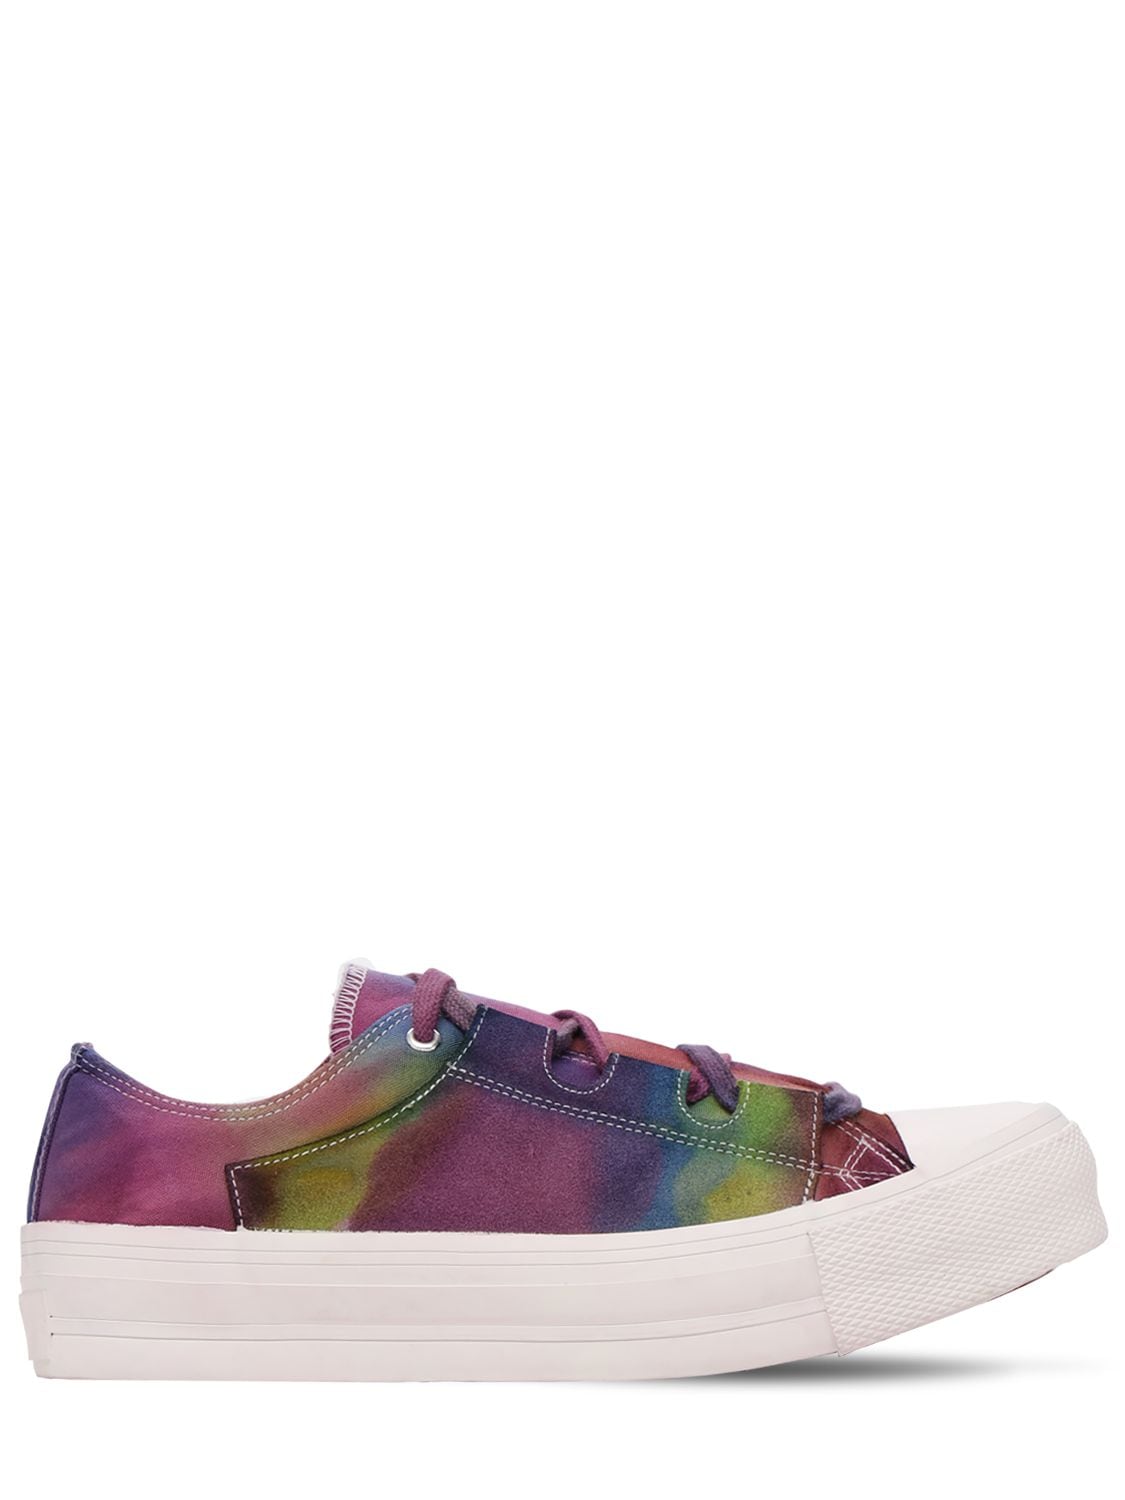 Ghillie Dyed Cotton Canvas Sneakers